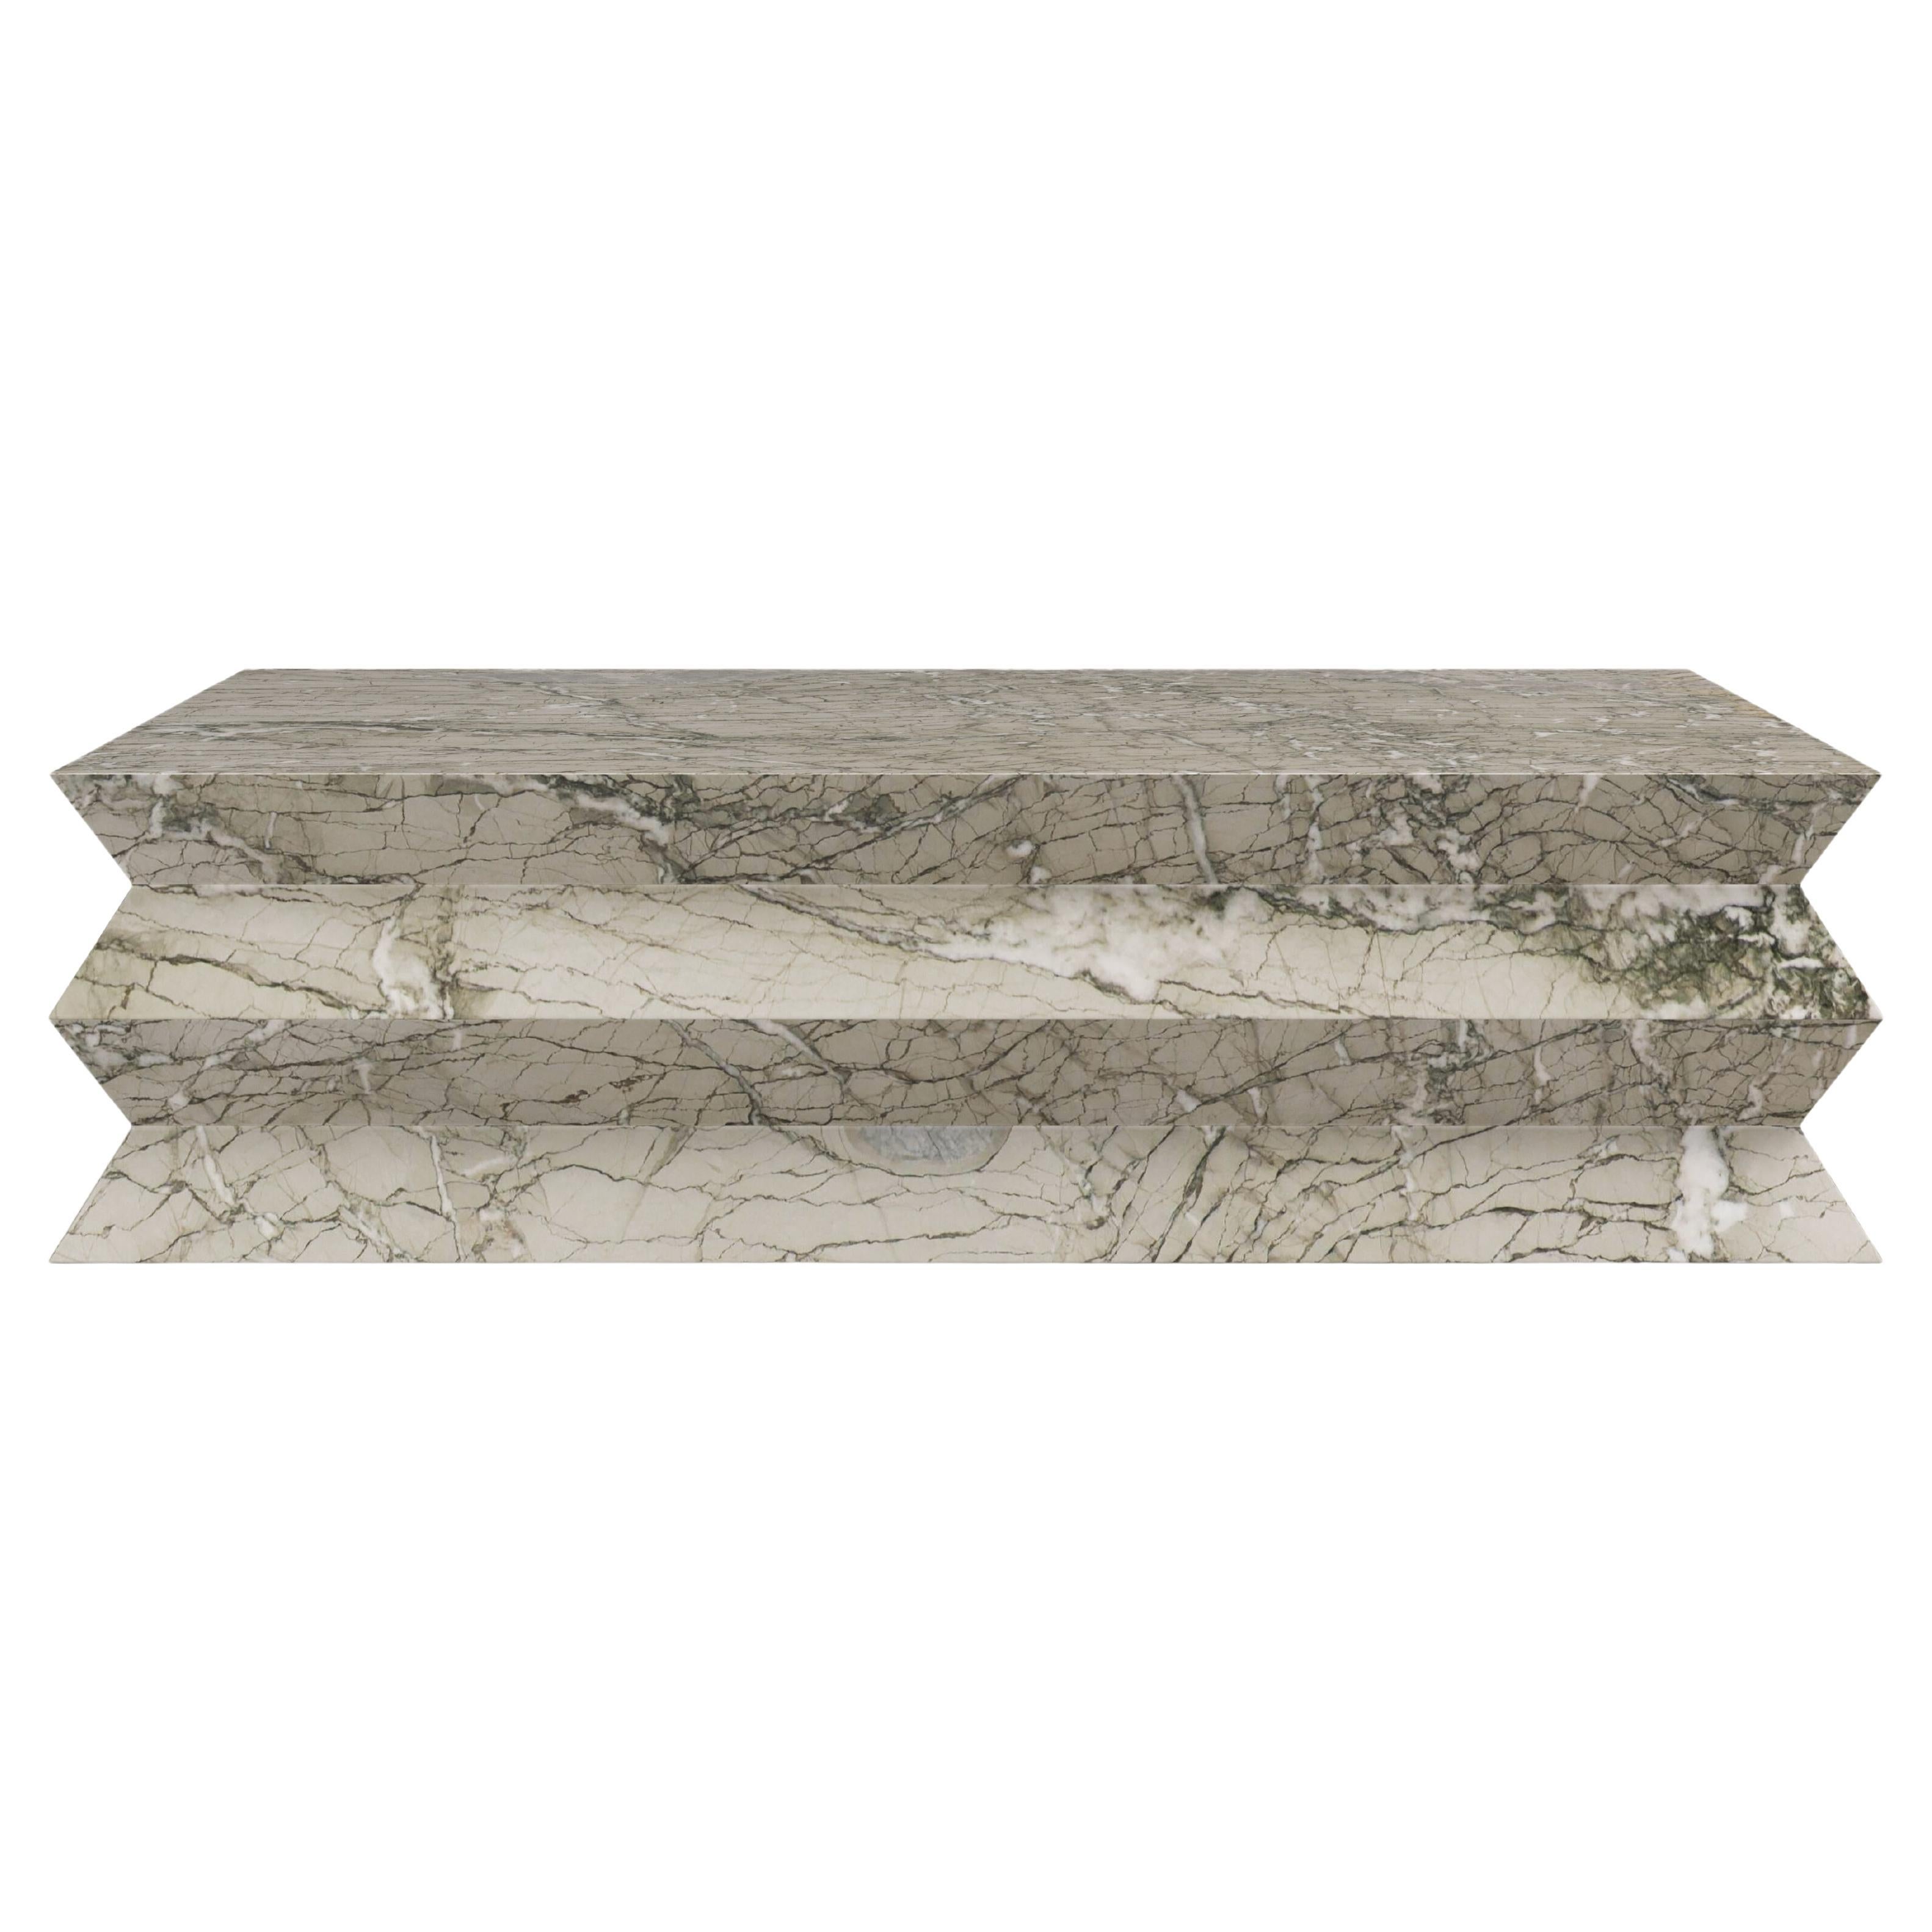 FORM(LA) Grinza Rectangle Coffee Table 60"L x 36"W x 16"H Verde Antigua Marble For Sale